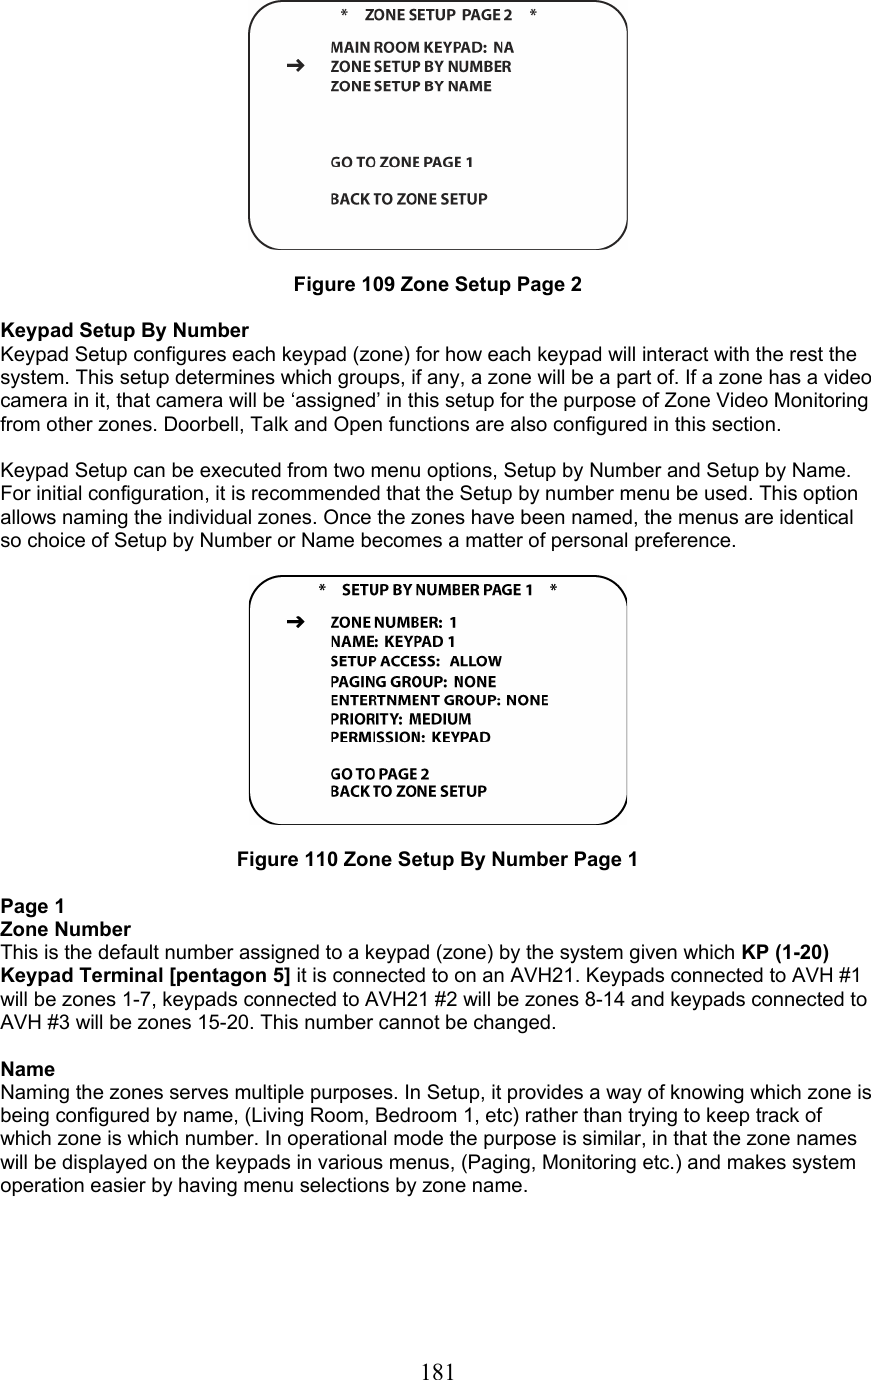  181  Figure 109 Zone Setup Page 2  Keypad Setup By Number Keypad Setup configures each keypad (zone) for how each keypad will interact with the rest the system. This setup determines which groups, if any, a zone will be a part of. If a zone has a video camera in it, that camera will be ‘assigned’ in this setup for the purpose of Zone Video Monitoring from other zones. Doorbell, Talk and Open functions are also configured in this section.  Keypad Setup can be executed from two menu options, Setup by Number and Setup by Name. For initial configuration, it is recommended that the Setup by number menu be used. This option allows naming the individual zones. Once the zones have been named, the menus are identical so choice of Setup by Number or Name becomes a matter of personal preference.    Figure 110 Zone Setup By Number Page 1  Page 1 Zone Number This is the default number assigned to a keypad (zone) by the system given which KP (1-20) Keypad Terminal [pentagon 5] it is connected to on an AVH21. Keypads connected to AVH #1 will be zones 1-7, keypads connected to AVH21 #2 will be zones 8-14 and keypads connected to AVH #3 will be zones 15-20. This number cannot be changed.  Name Naming the zones serves multiple purposes. In Setup, it provides a way of knowing which zone is being configured by name, (Living Room, Bedroom 1, etc) rather than trying to keep track of which zone is which number. In operational mode the purpose is similar, in that the zone names will be displayed on the keypads in various menus, (Paging, Monitoring etc.) and makes system operation easier by having menu selections by zone name.     